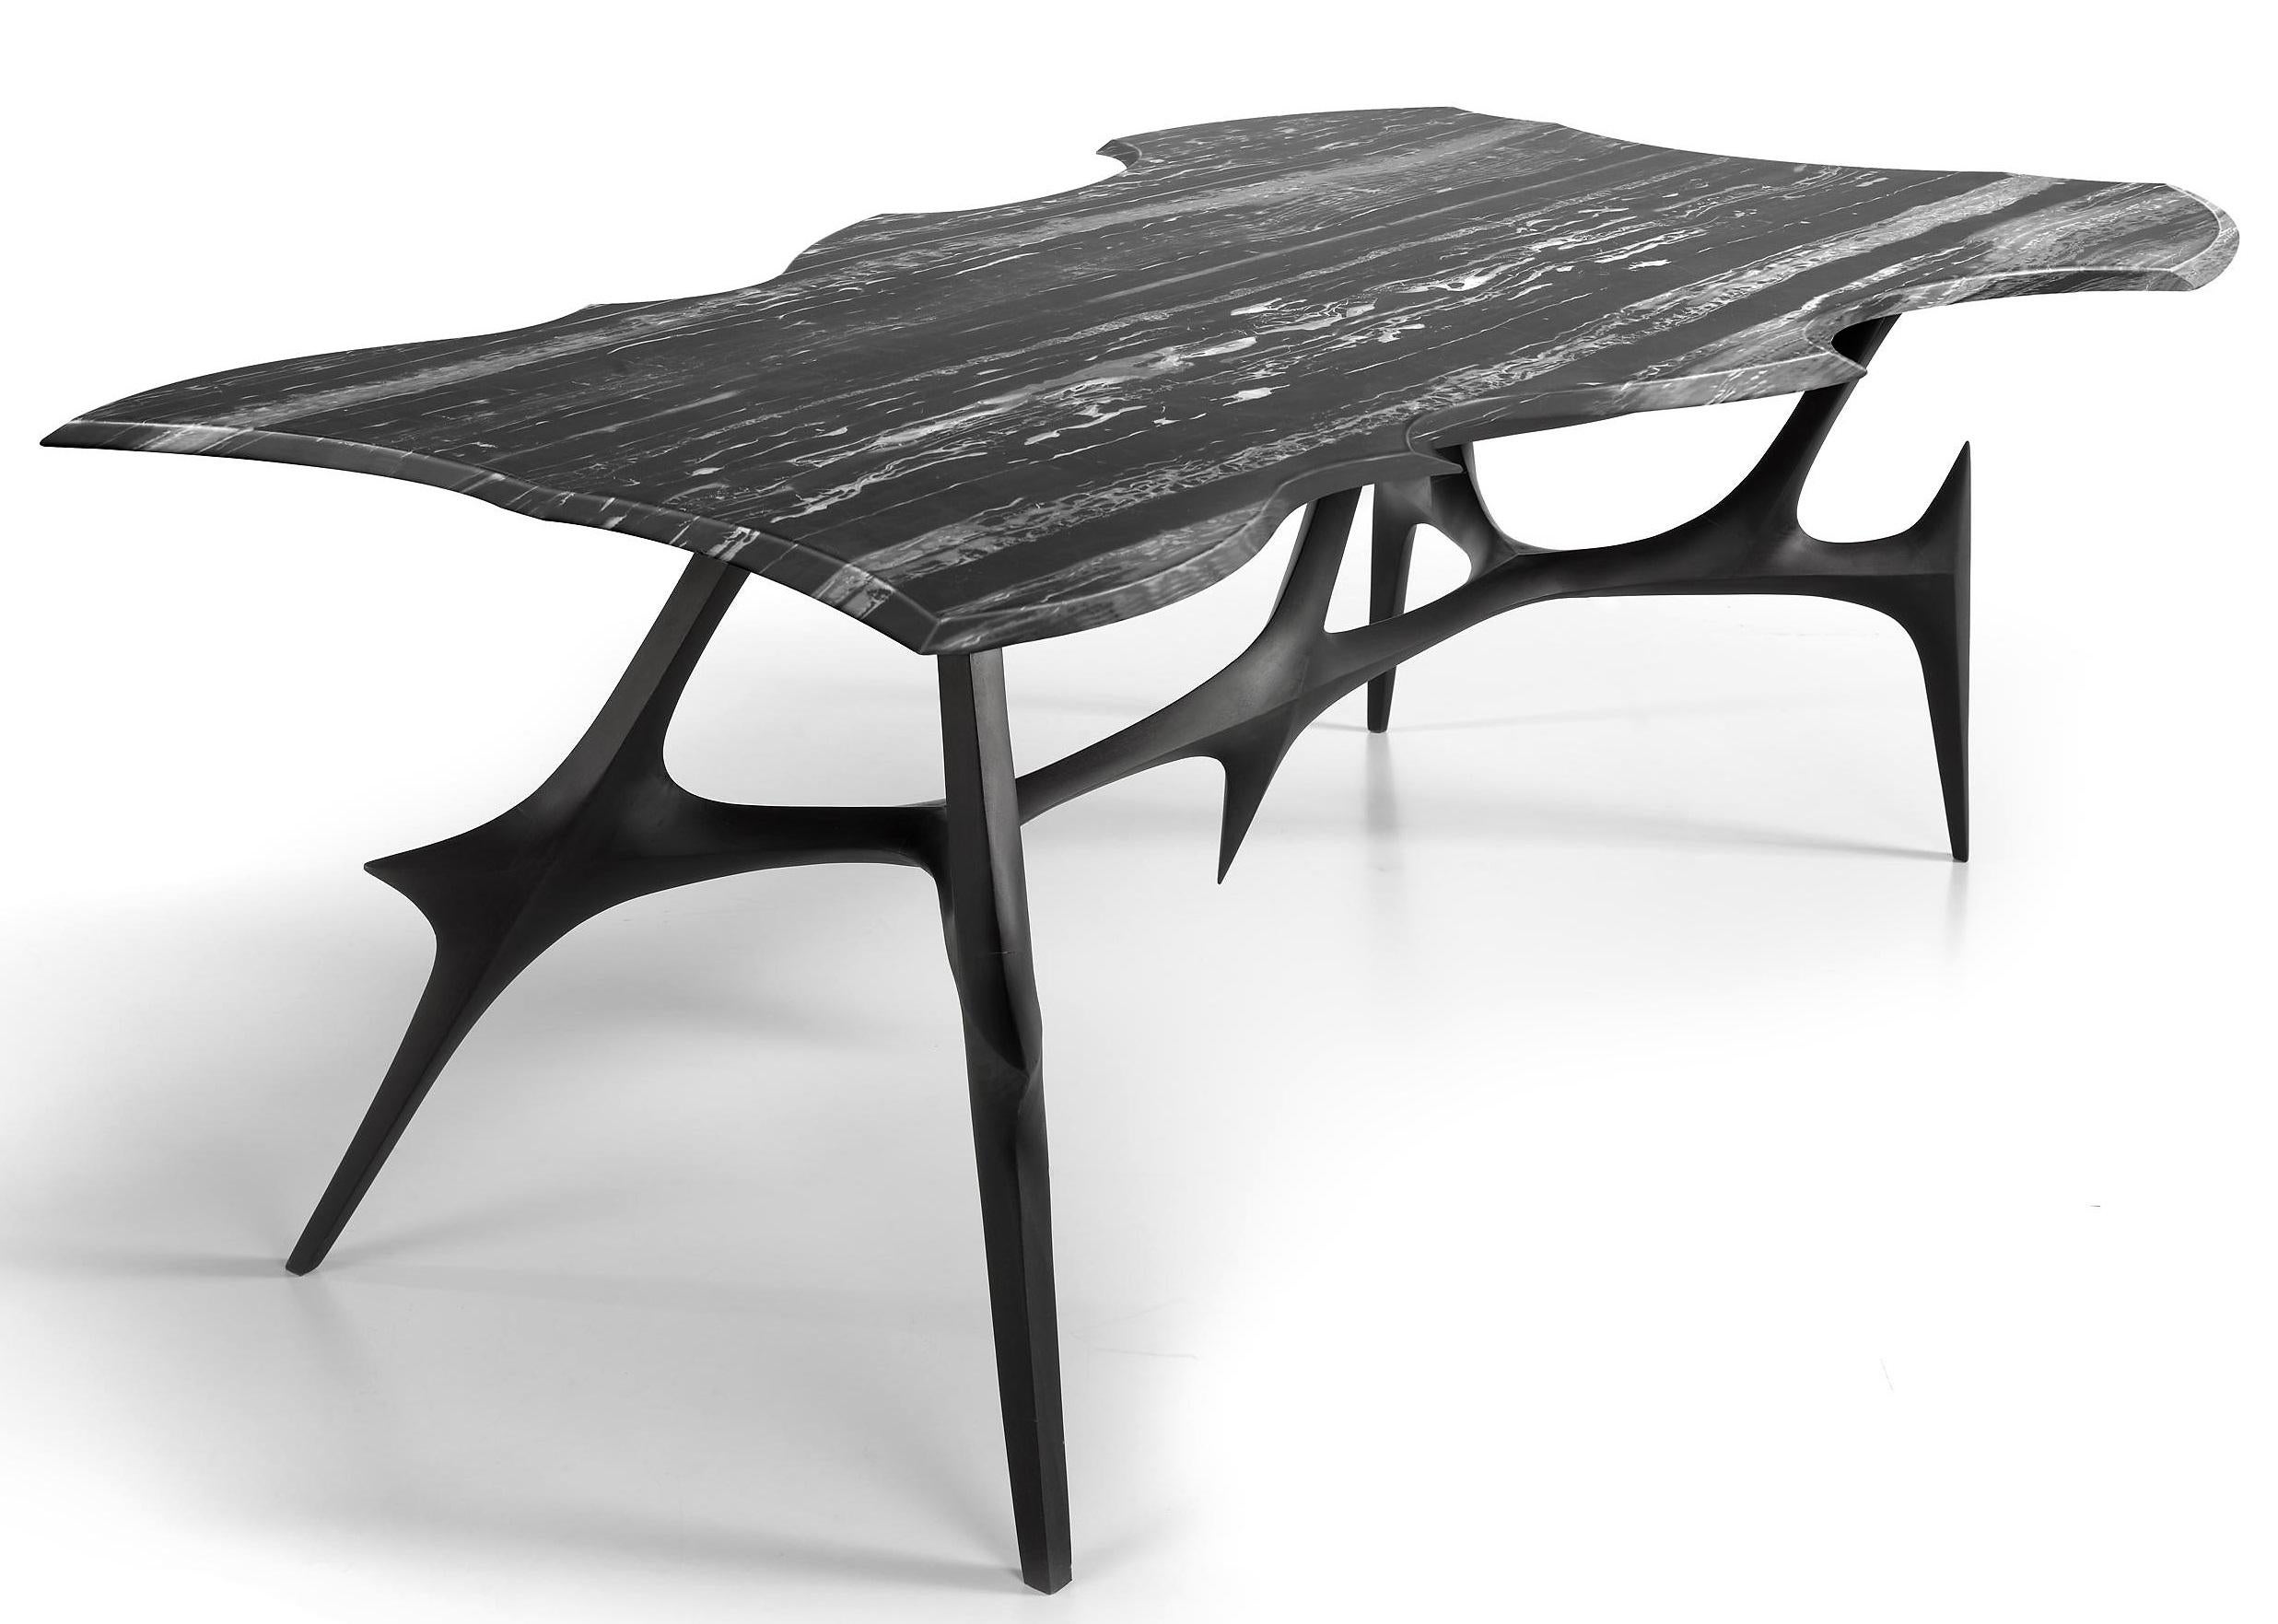 Limited Edition Dining Table Made To Order With American Walnut & Marble 3